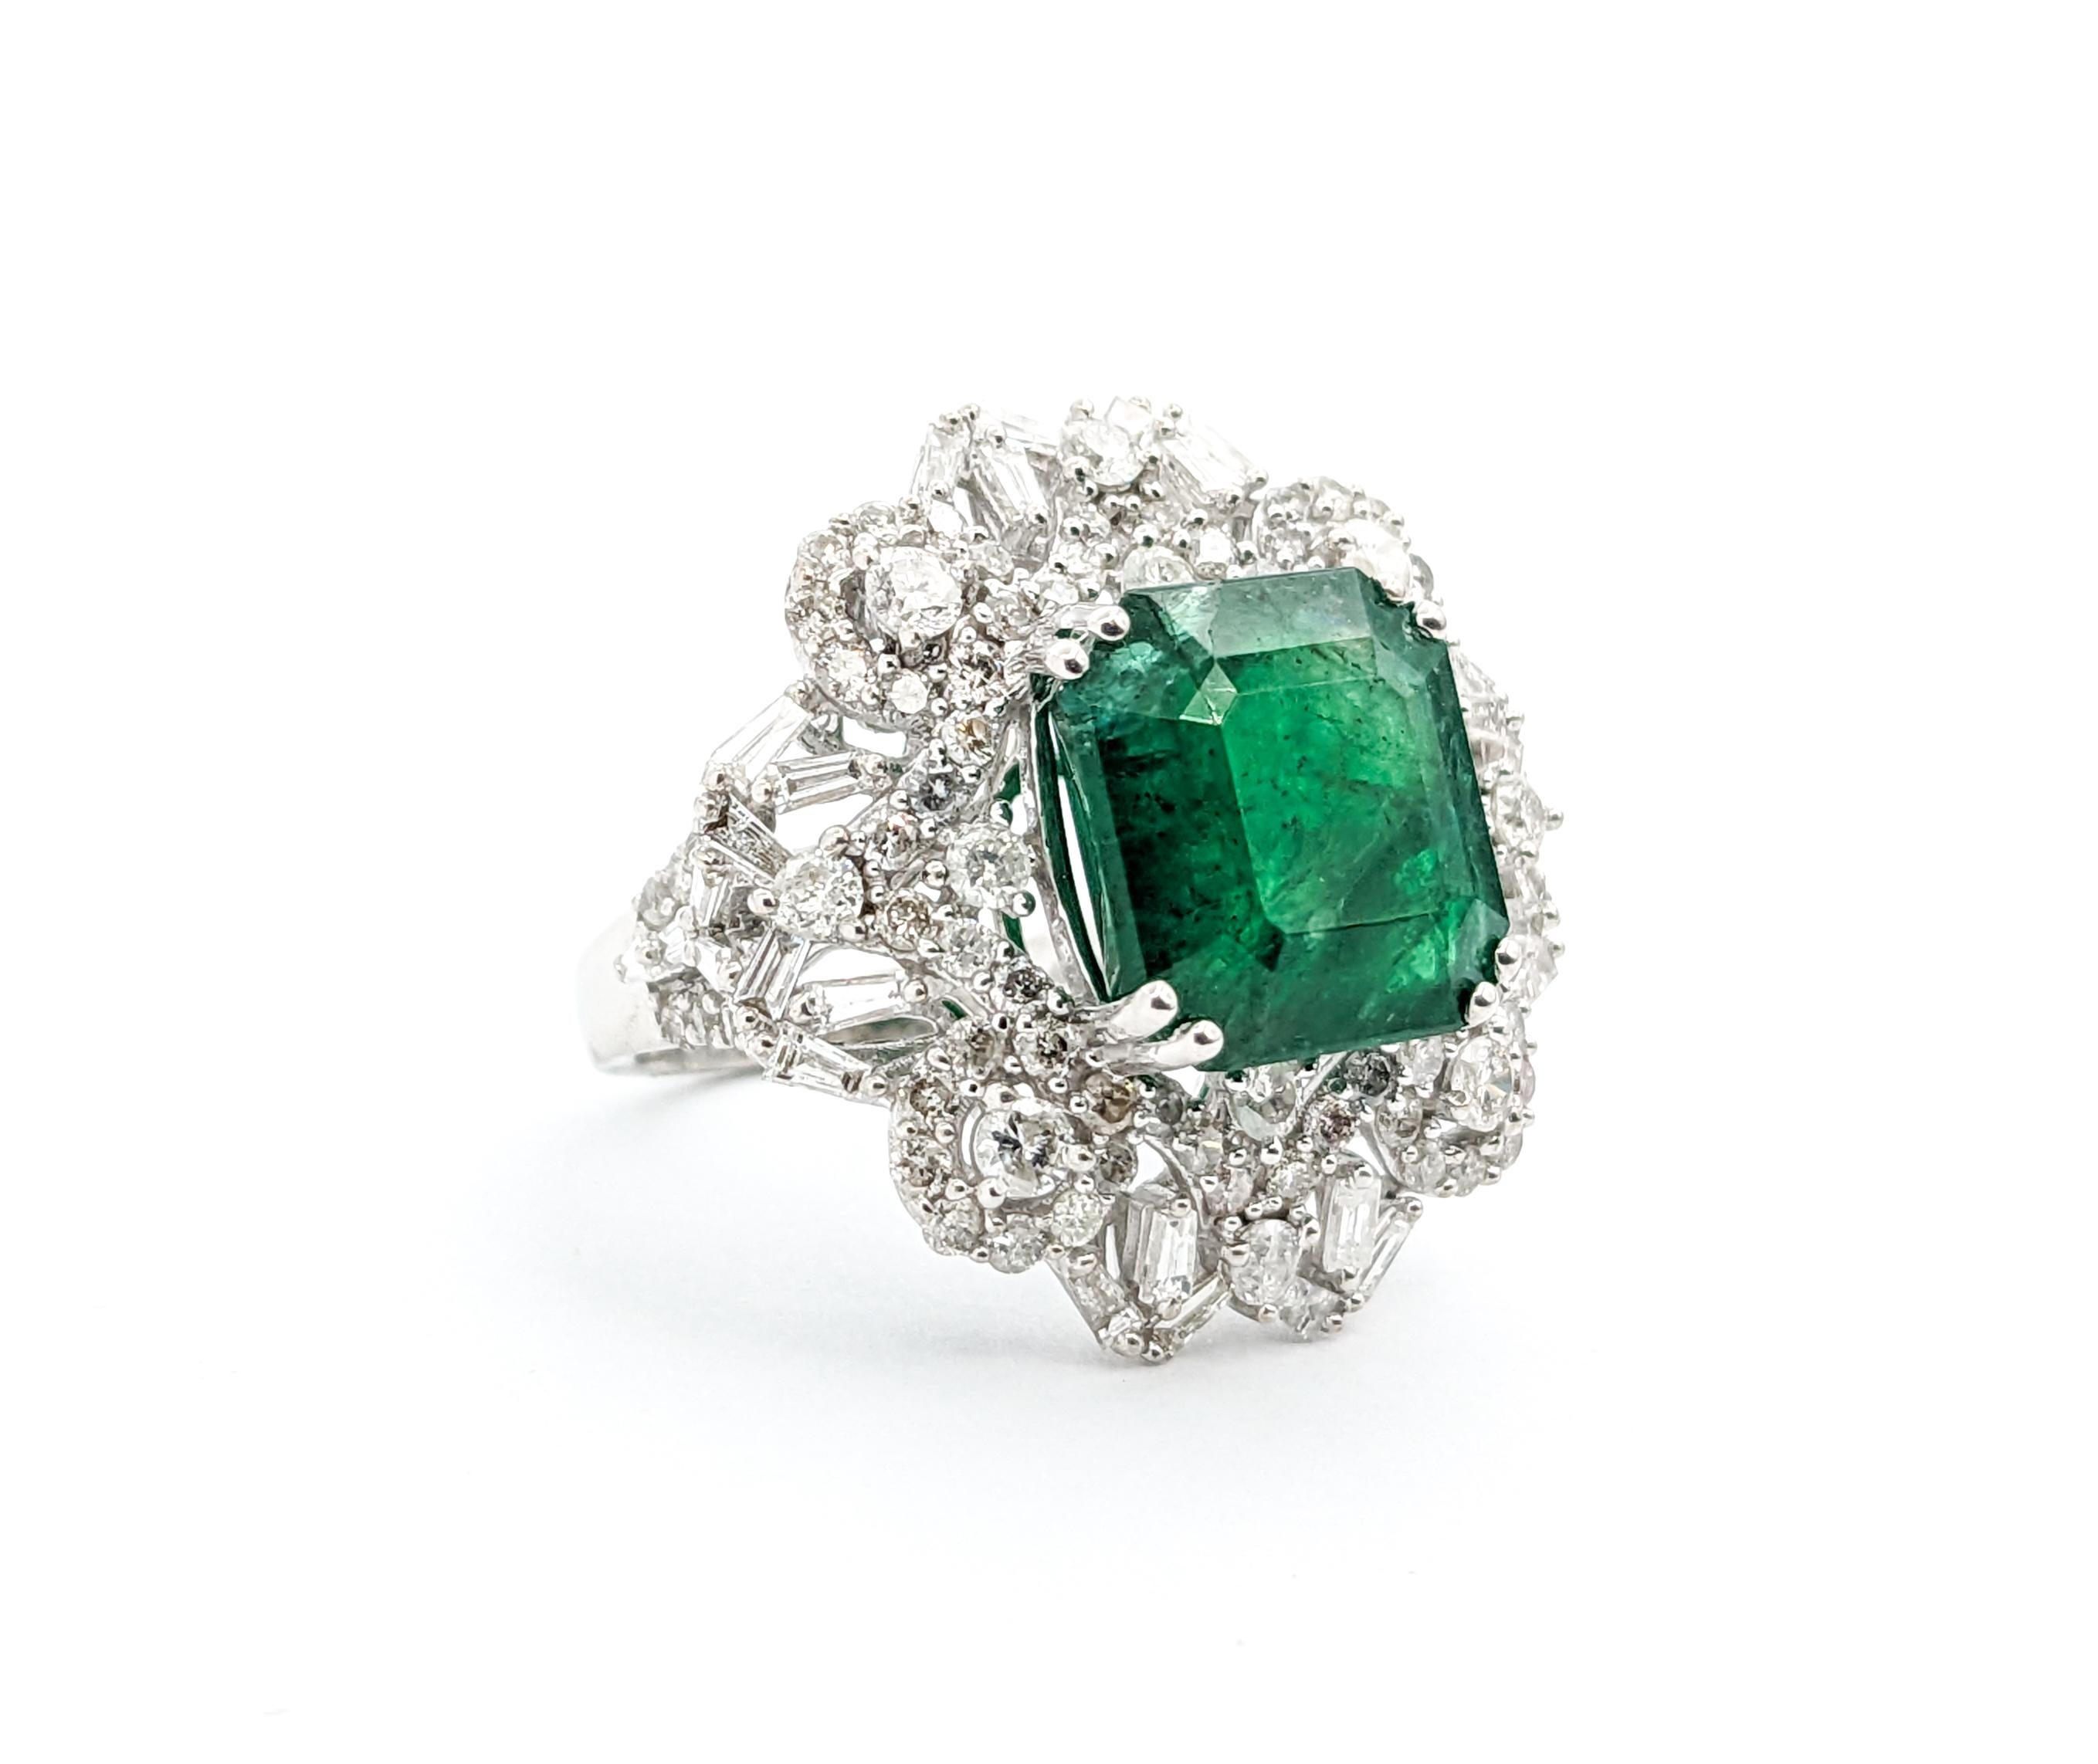 8.24ct Emerald & Diamond Ring In White Gold

8.24ct Emerald & Diamond Ring In White Gold

Introducing this beautiful heirloom quality Emerald Ring crafted in bright 14K White Gold. This ring showcases a magnificent 8.24-carat emerald, known for its